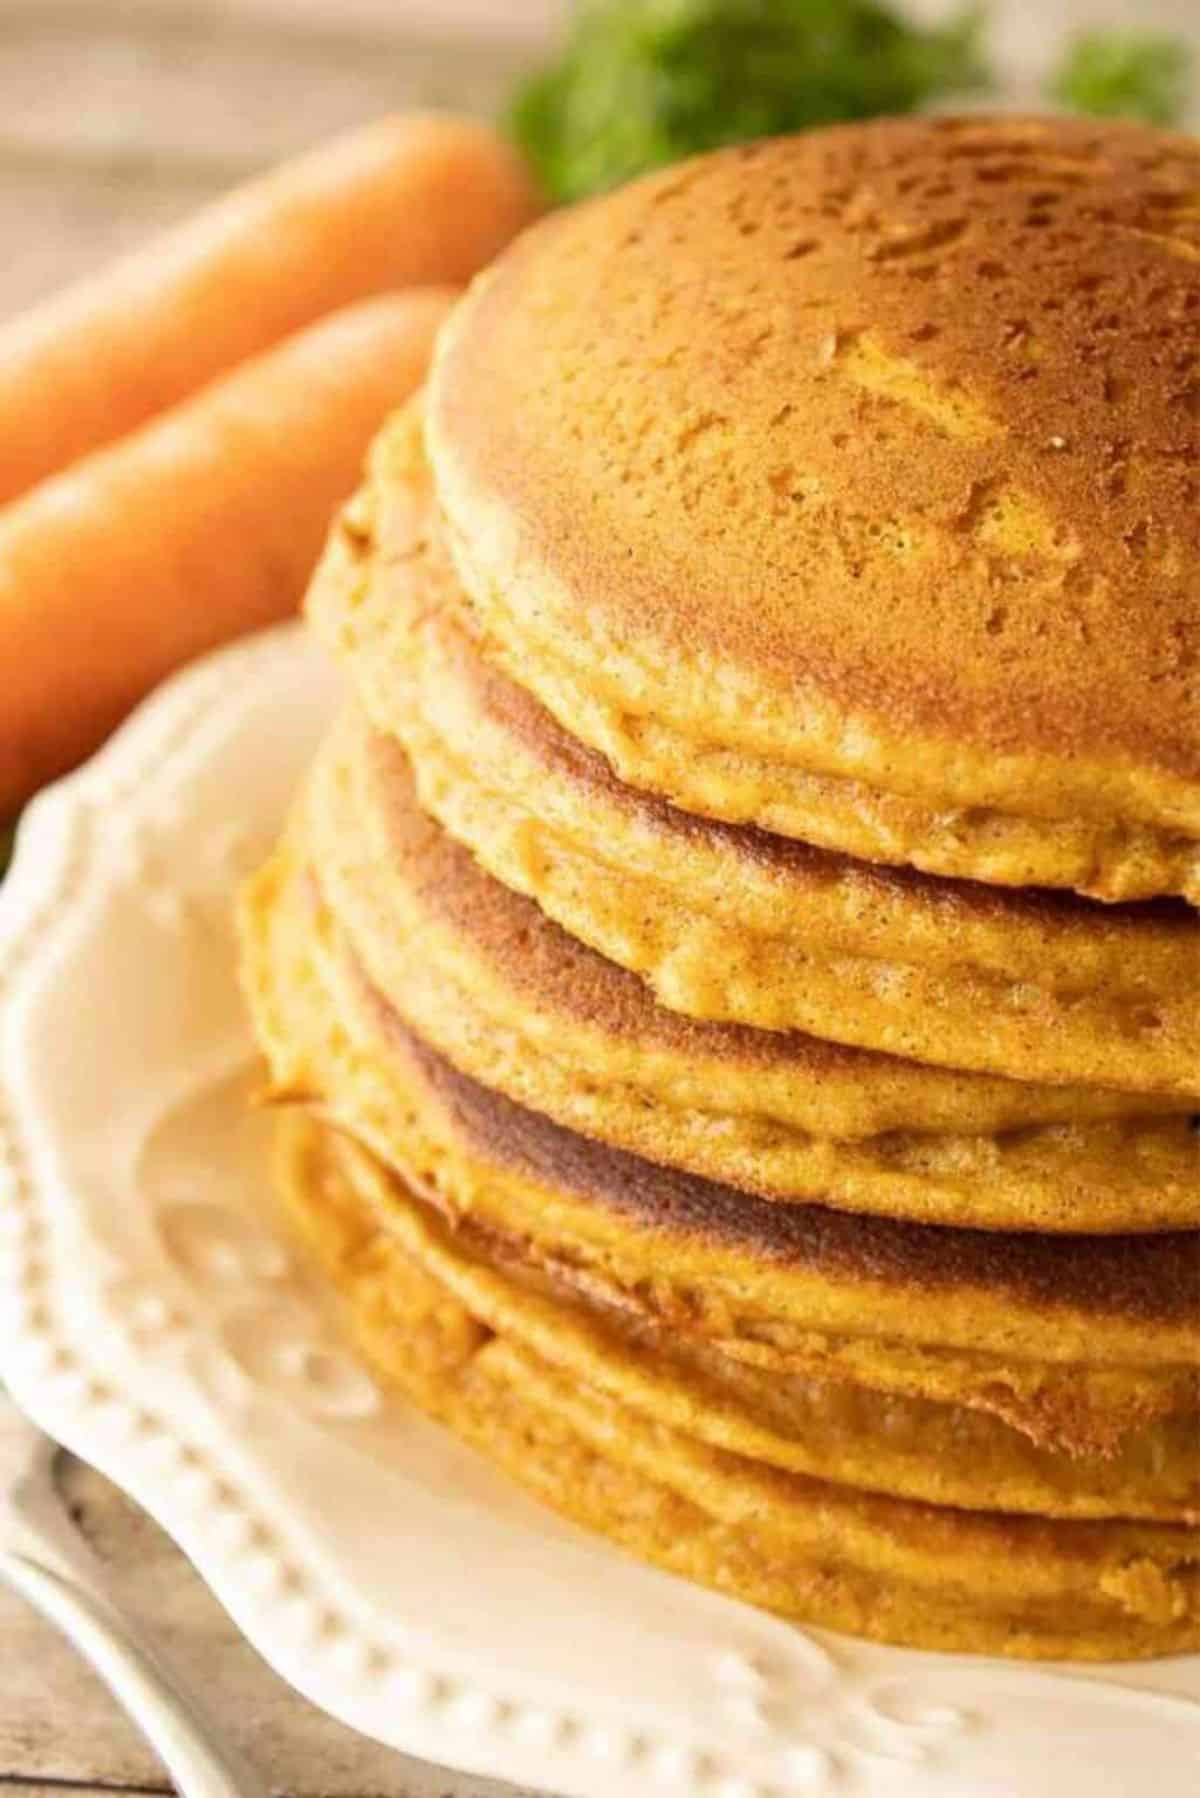 A pile of Carrot Cake Pancakes with Cream Cheese Syrup  on a white plate.